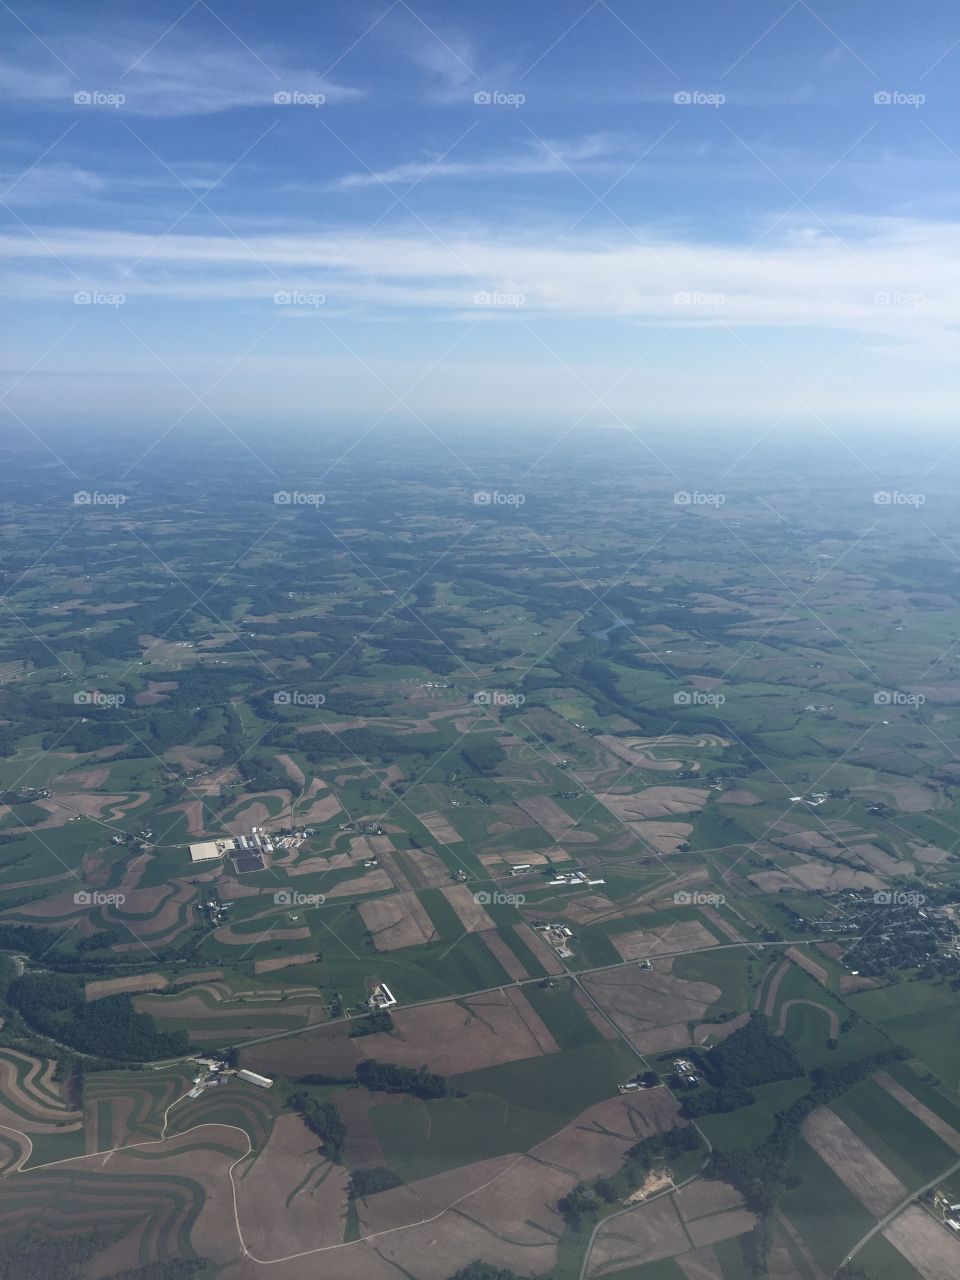 Midwest from an airplane